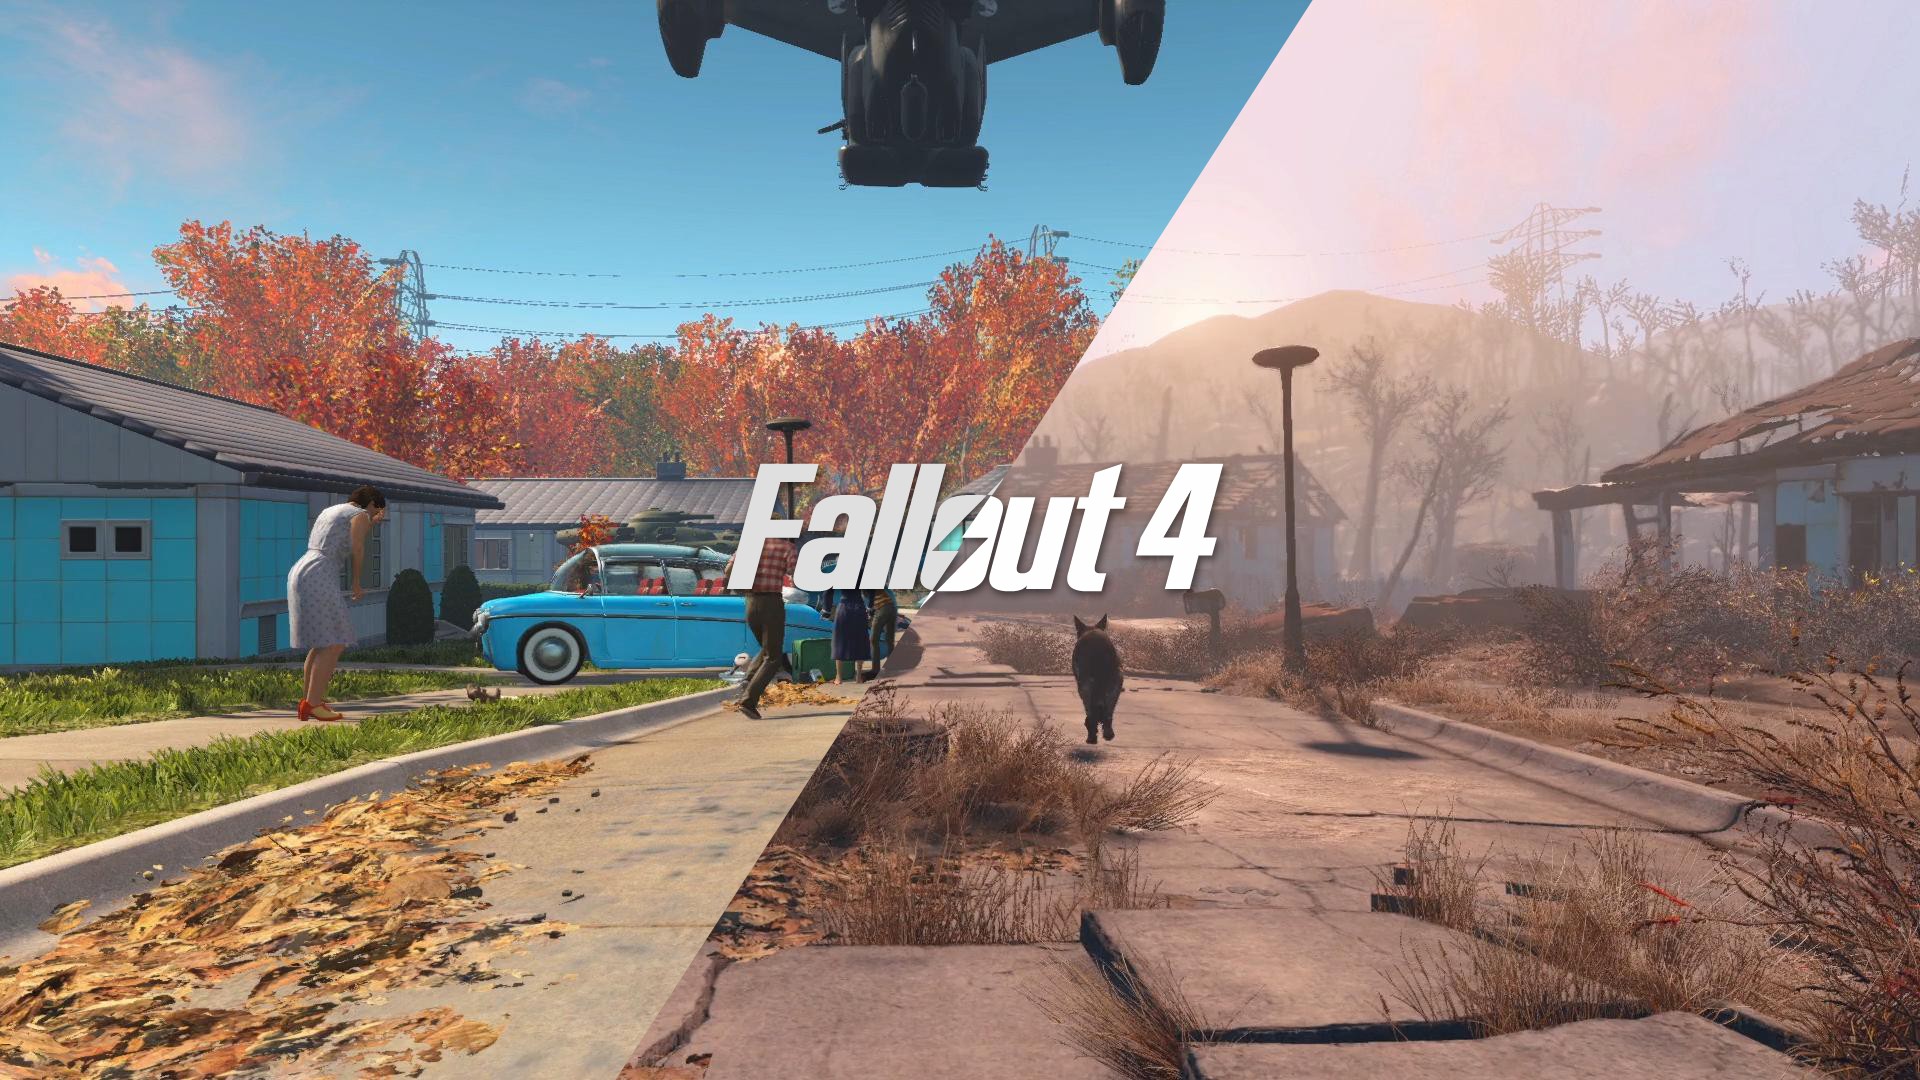 General 1920x1080 Fallout 4 video games Fallout Bethesda Softworks